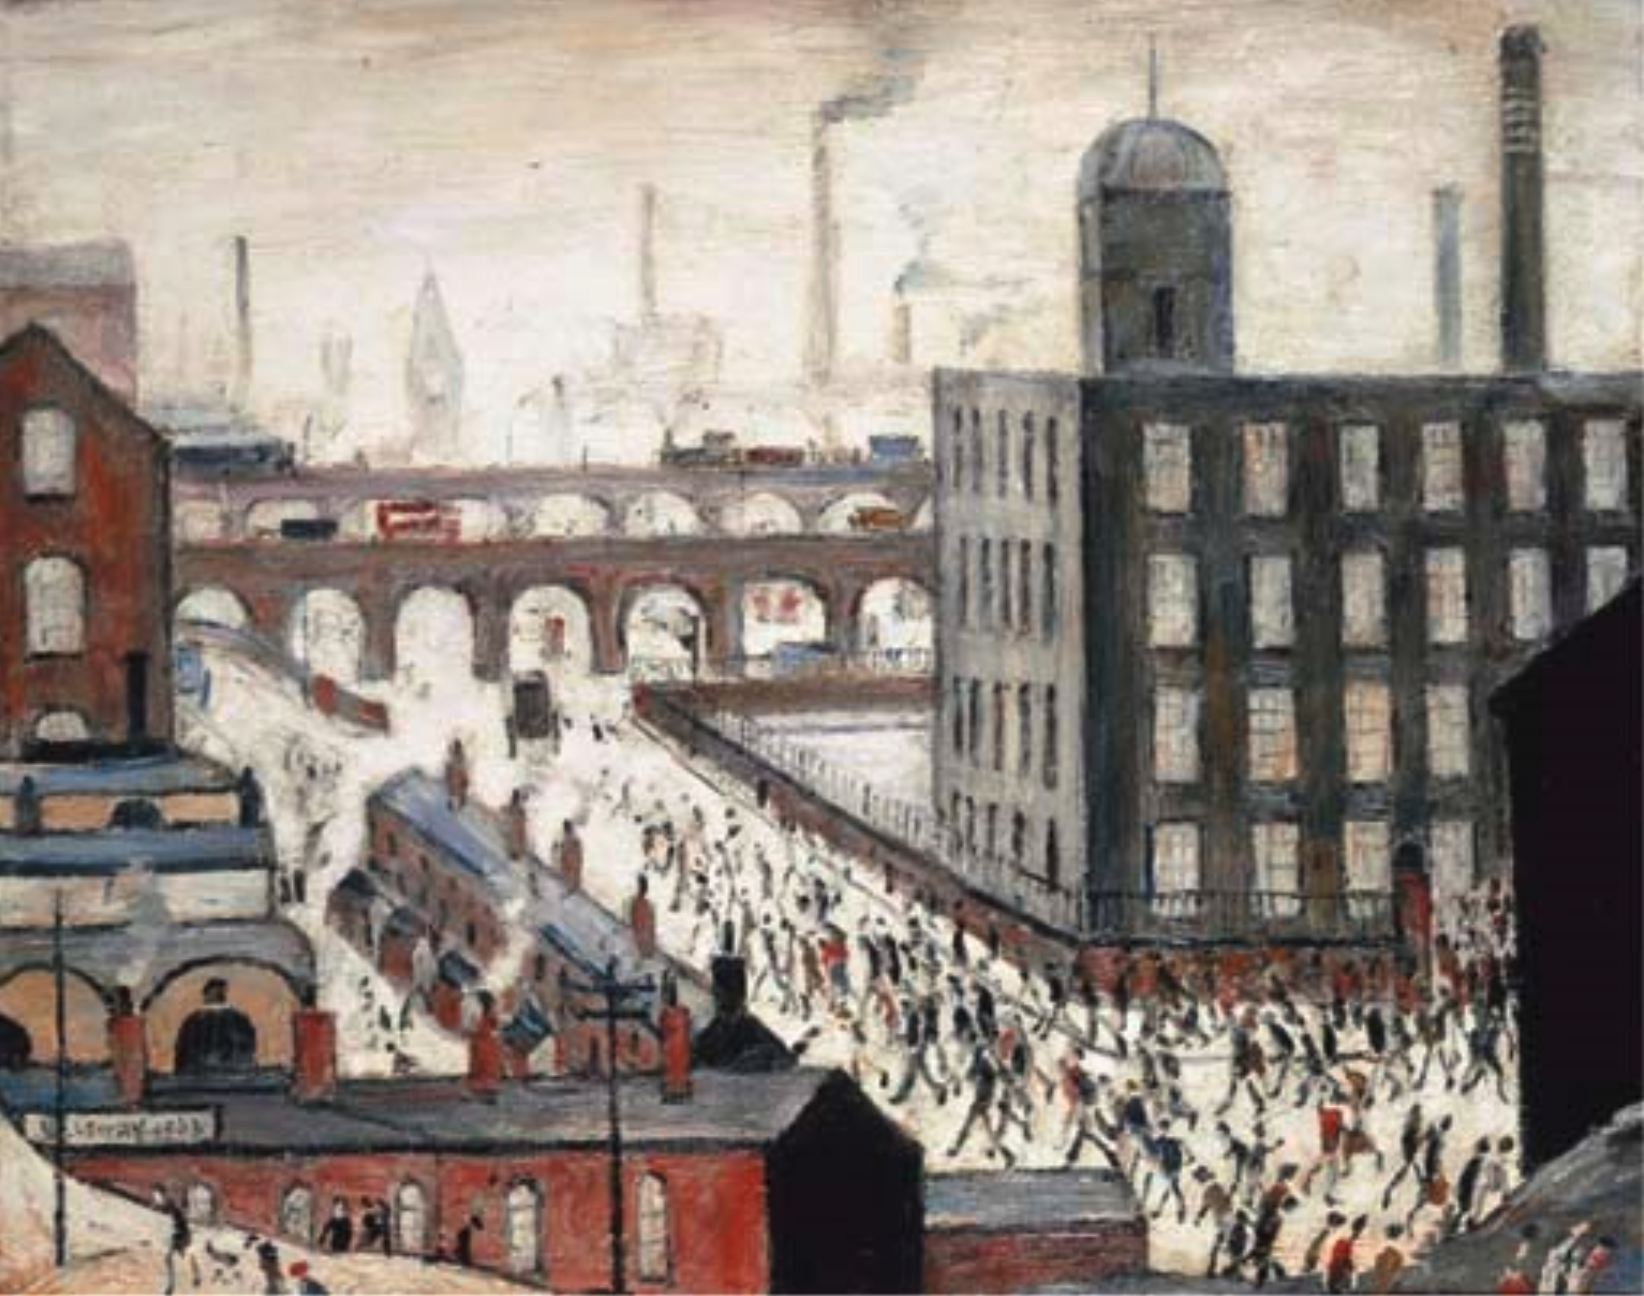 Leaving the mill (1962) by Laurence Stephen Lowry (1887 - 1976), English artist.